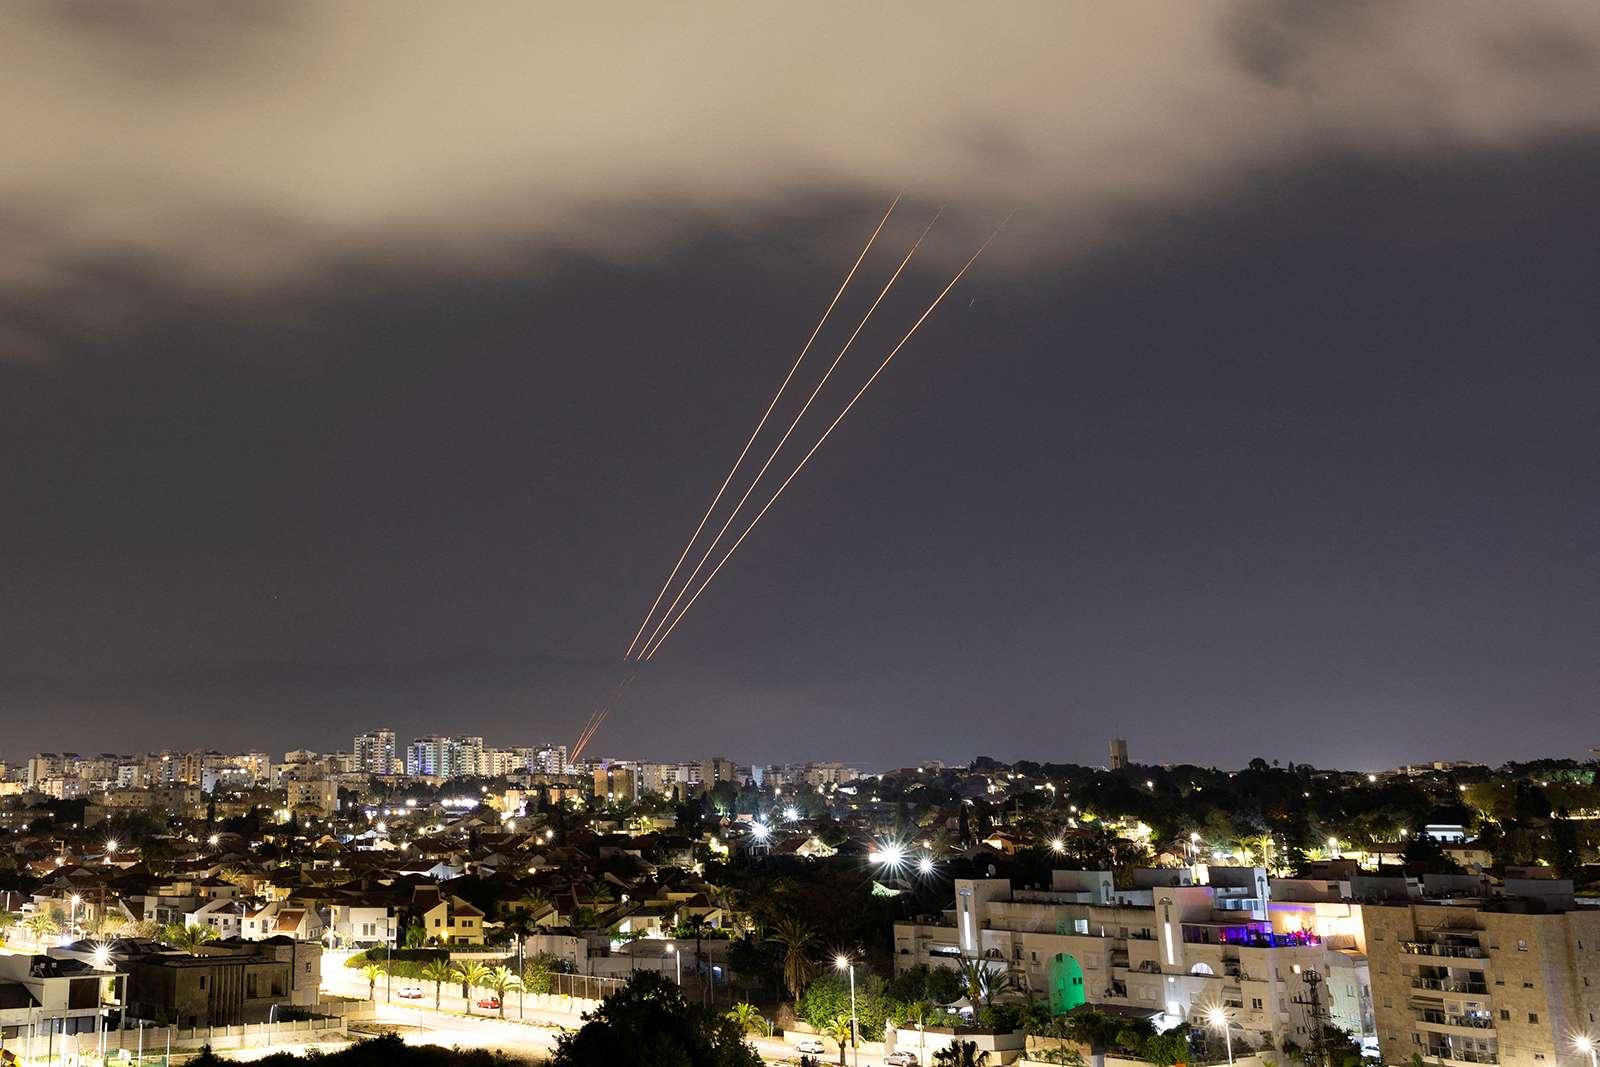 An anti-missile system operates after Iran launched drones and missiles towards Israel, as seen from Ashkelon, Israel April 14.